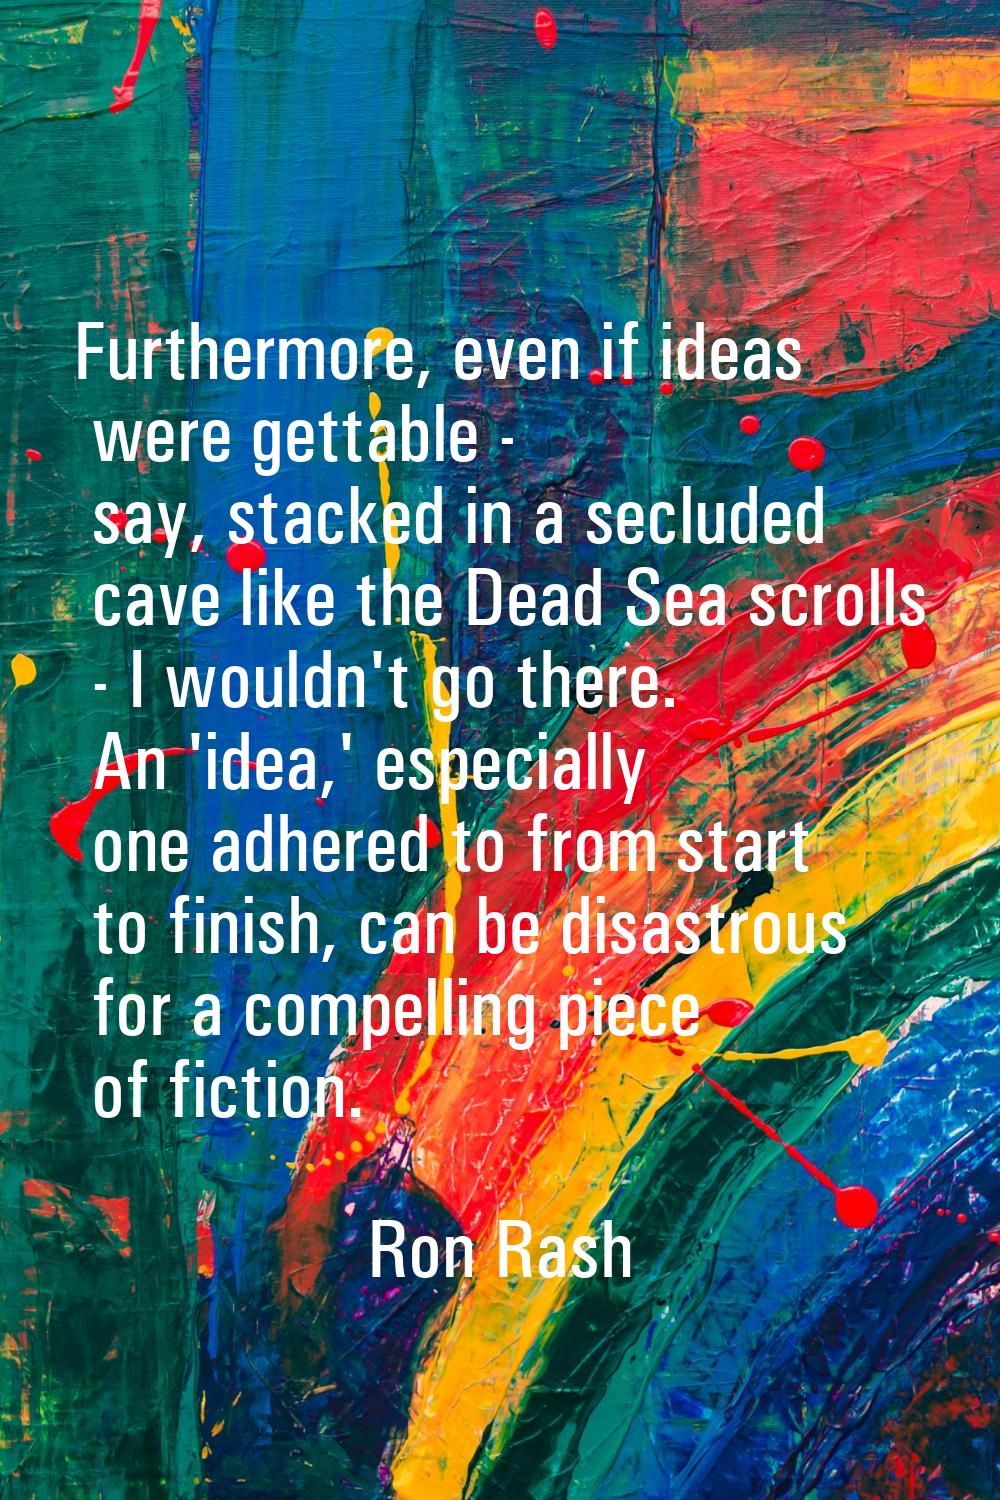 Furthermore, even if ideas were gettable - say, stacked in a secluded cave like the Dead Sea scroll